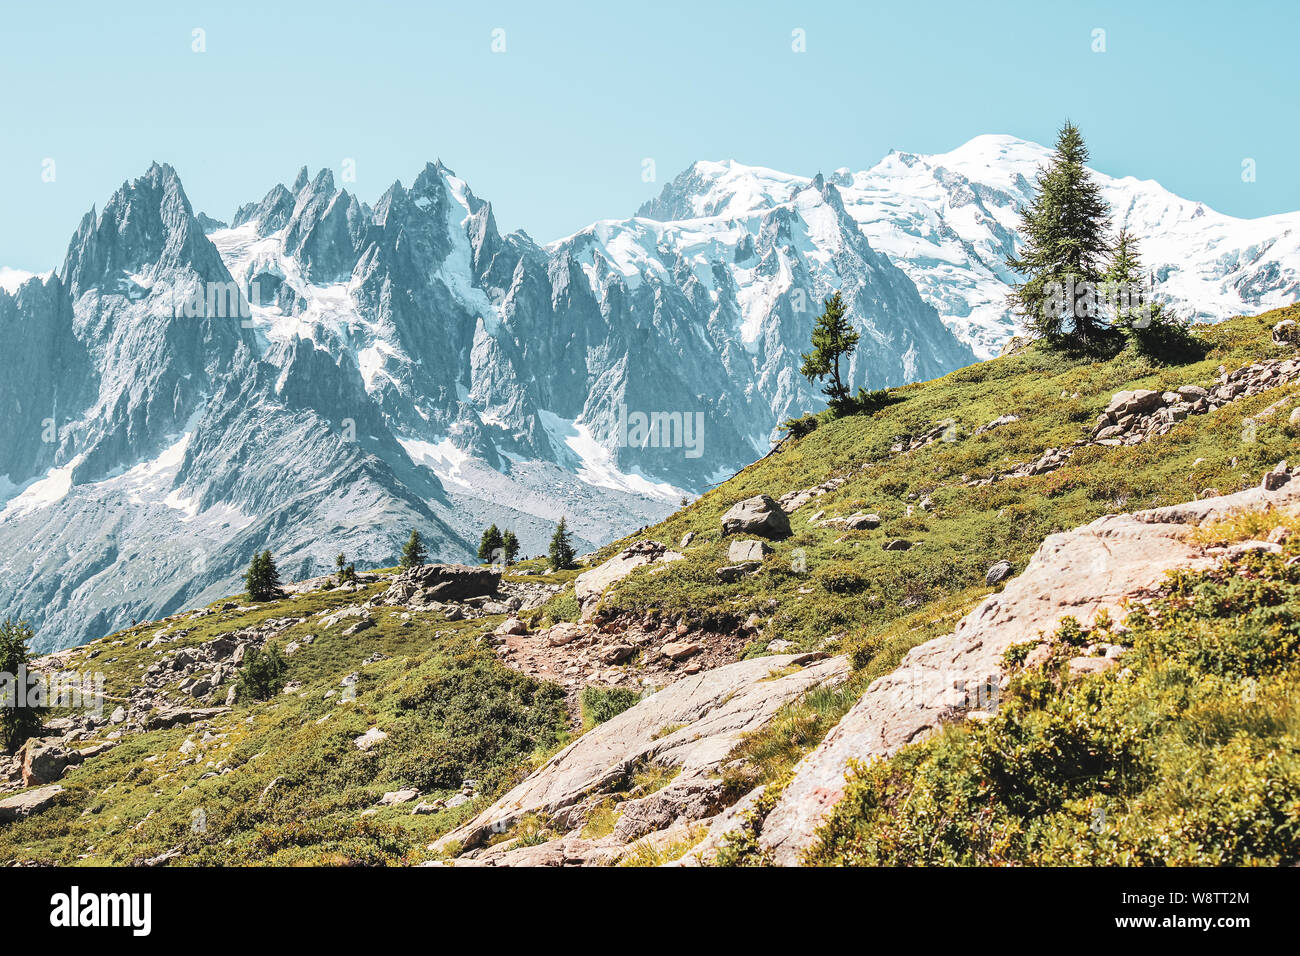 Alpine landscape with snow capped mountains including the highest mountain of Europe Mount Blanc. Photographed in late summer near Chamonix, France. French Alps in summer. Adventure, mountain hiking. Stock Photo